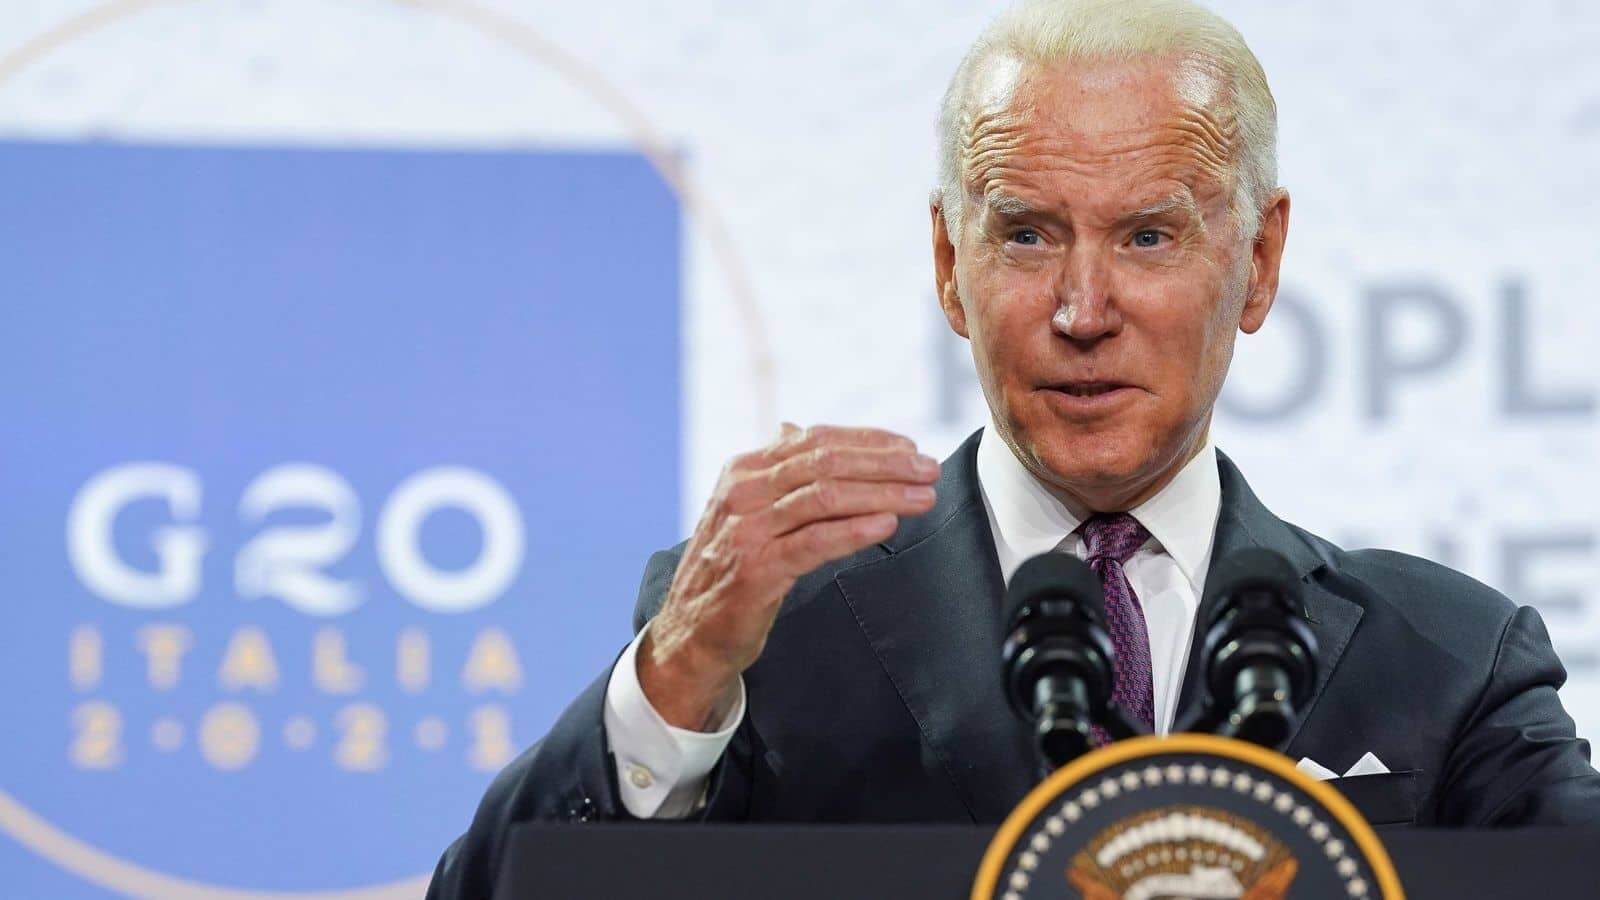 Biden Expresses Disappointment at China and Russia’s Absence at G20 Summit